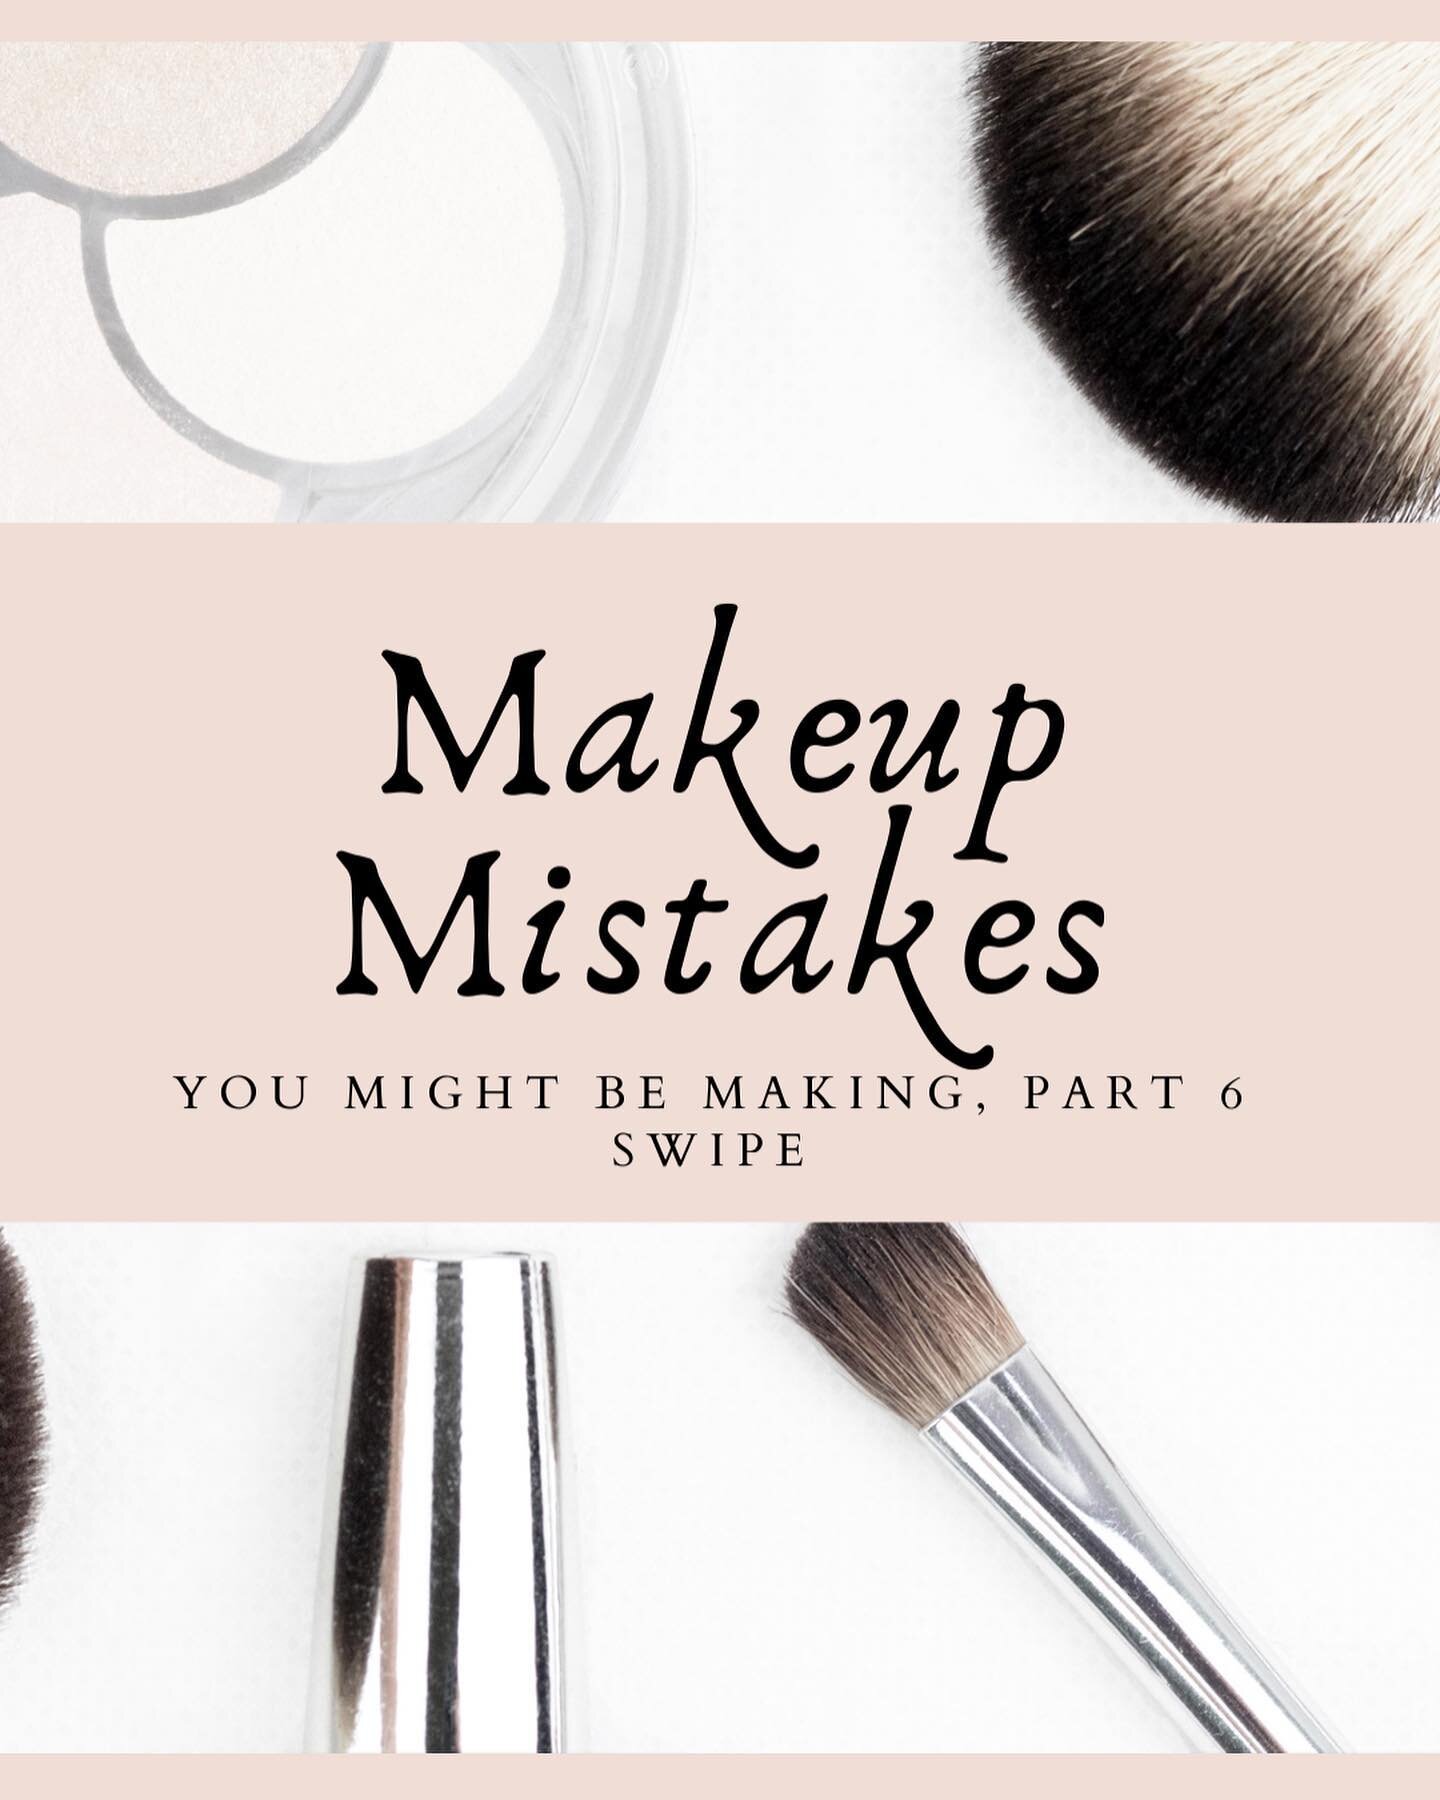 Makeup Mistakes you might be making, part 6! Swipe for video.

The way you hold your makeup brushes really makes the biggest difference in the application of your makeup, how your makeup goes on and blends. 

Let me know if you have any additional qu